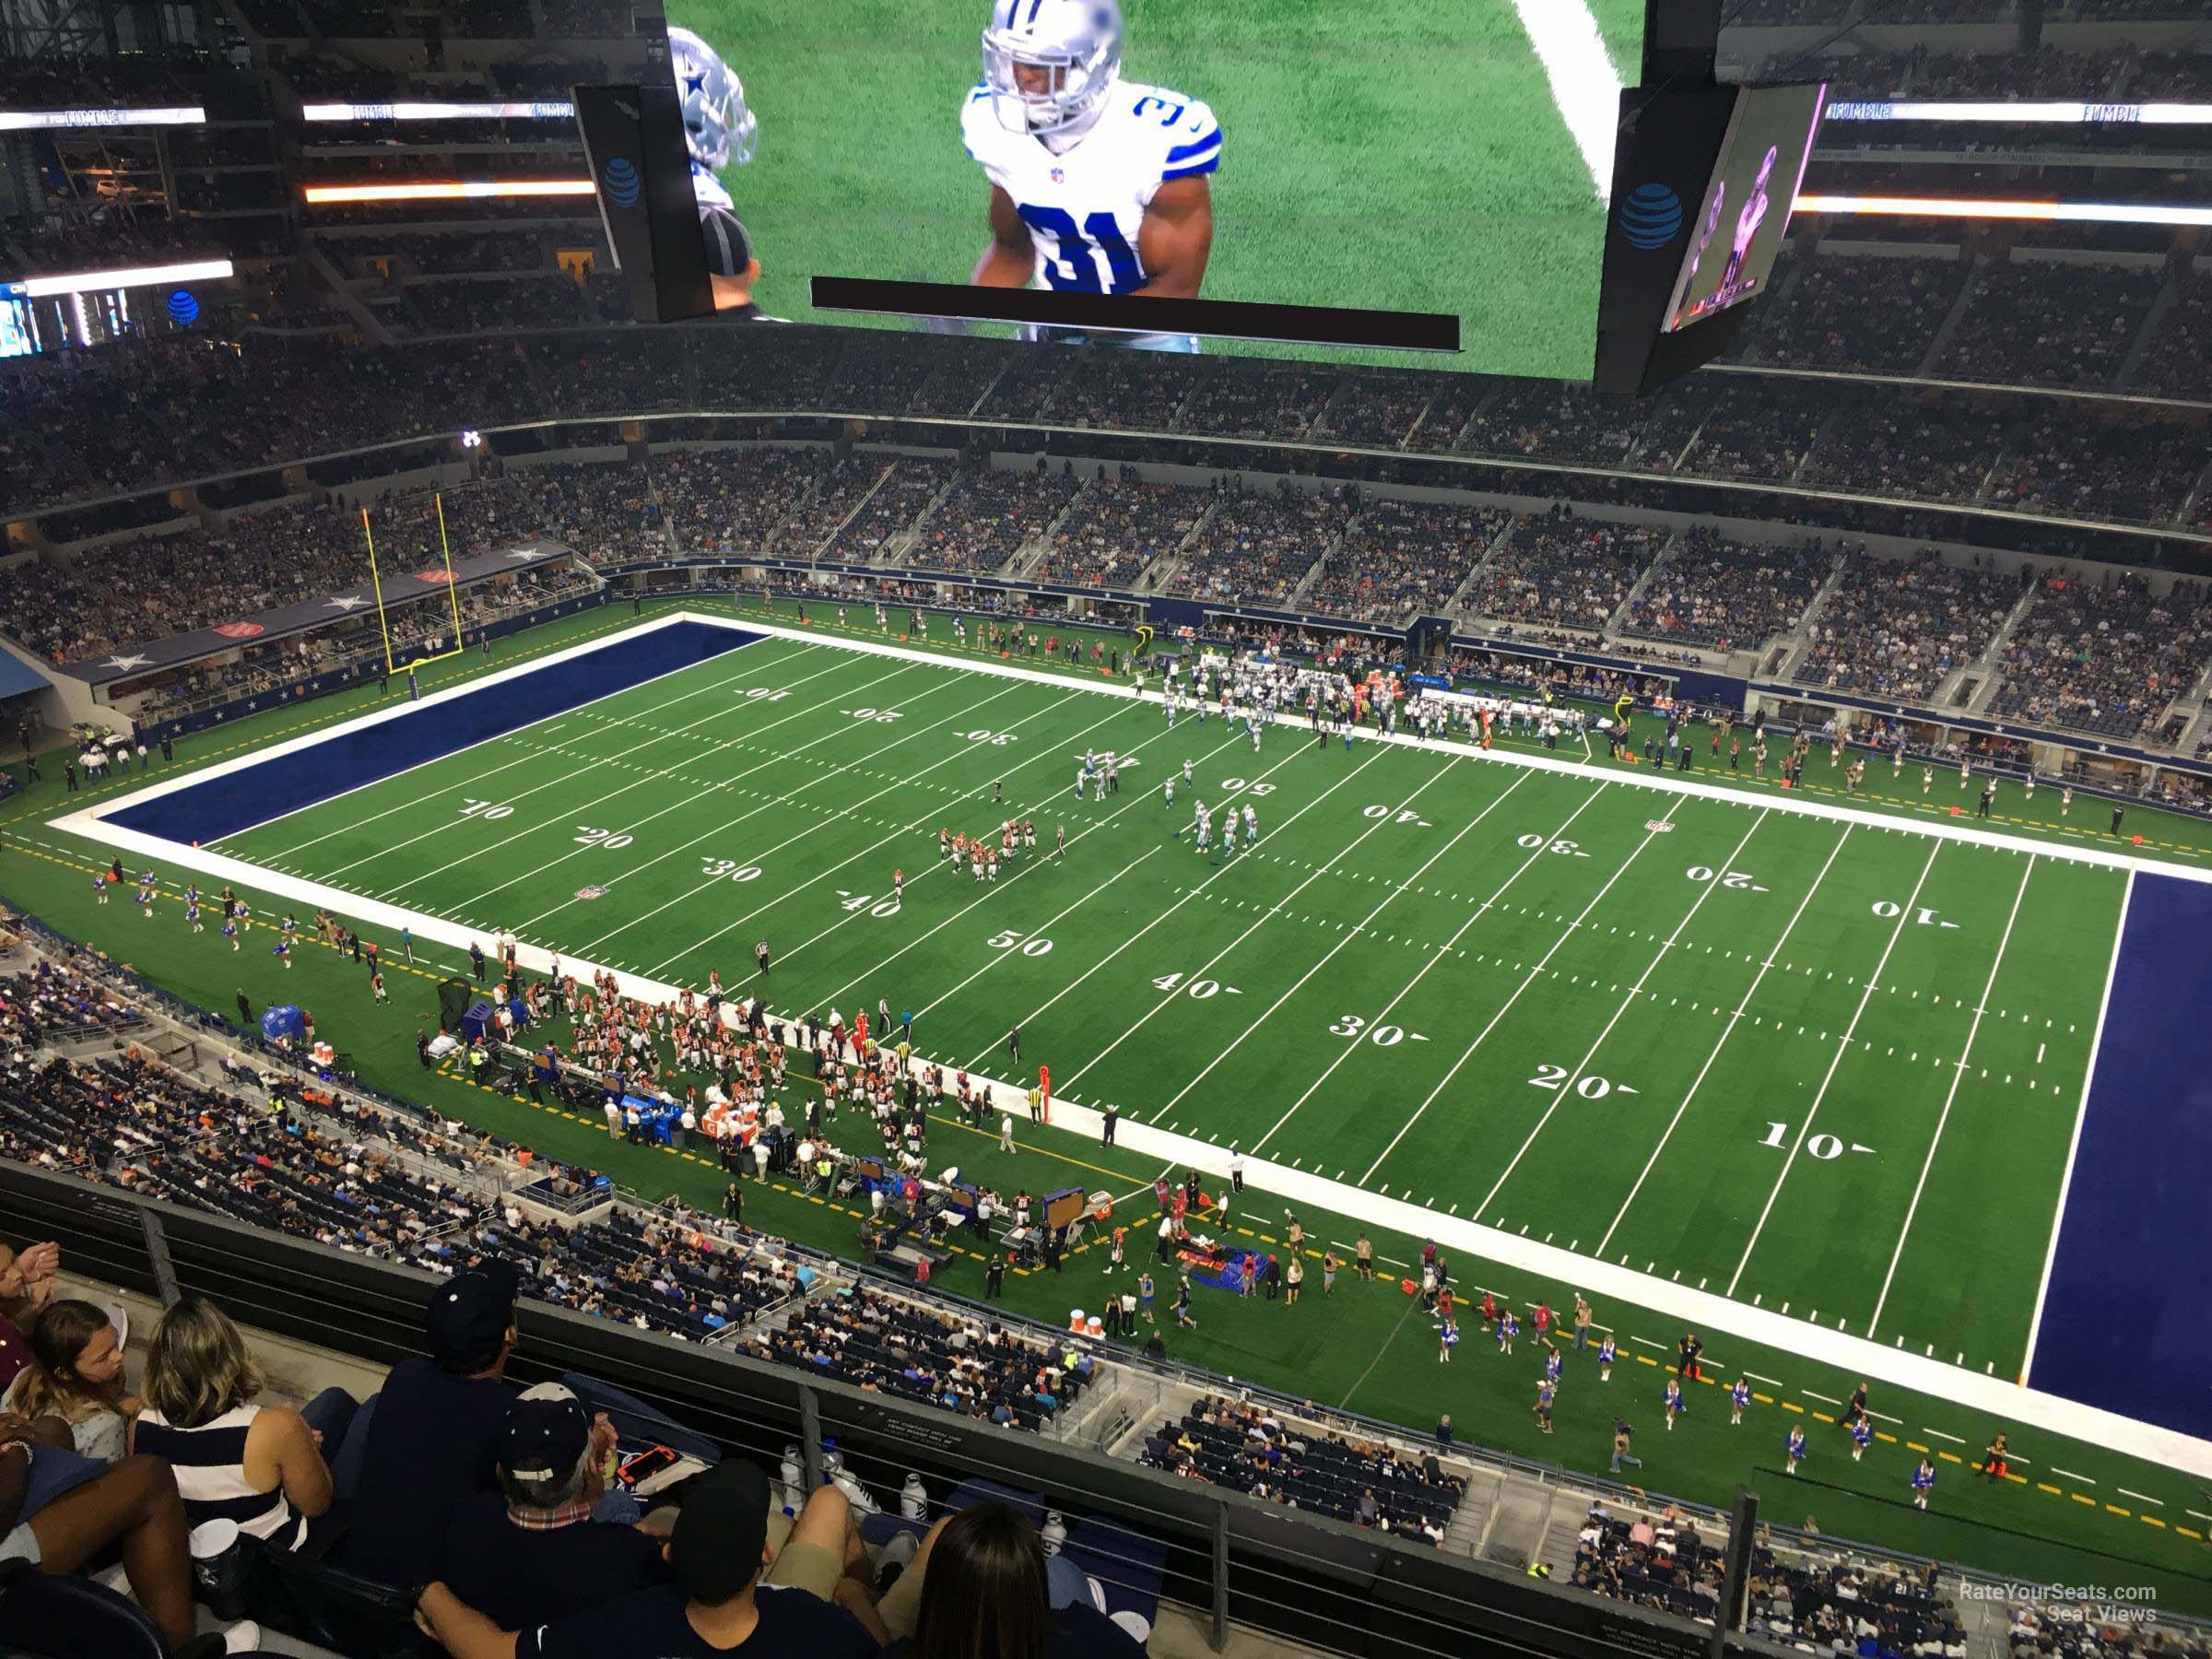 section 439, row 22 seat view  for football - at&t stadium (cowboys stadium)